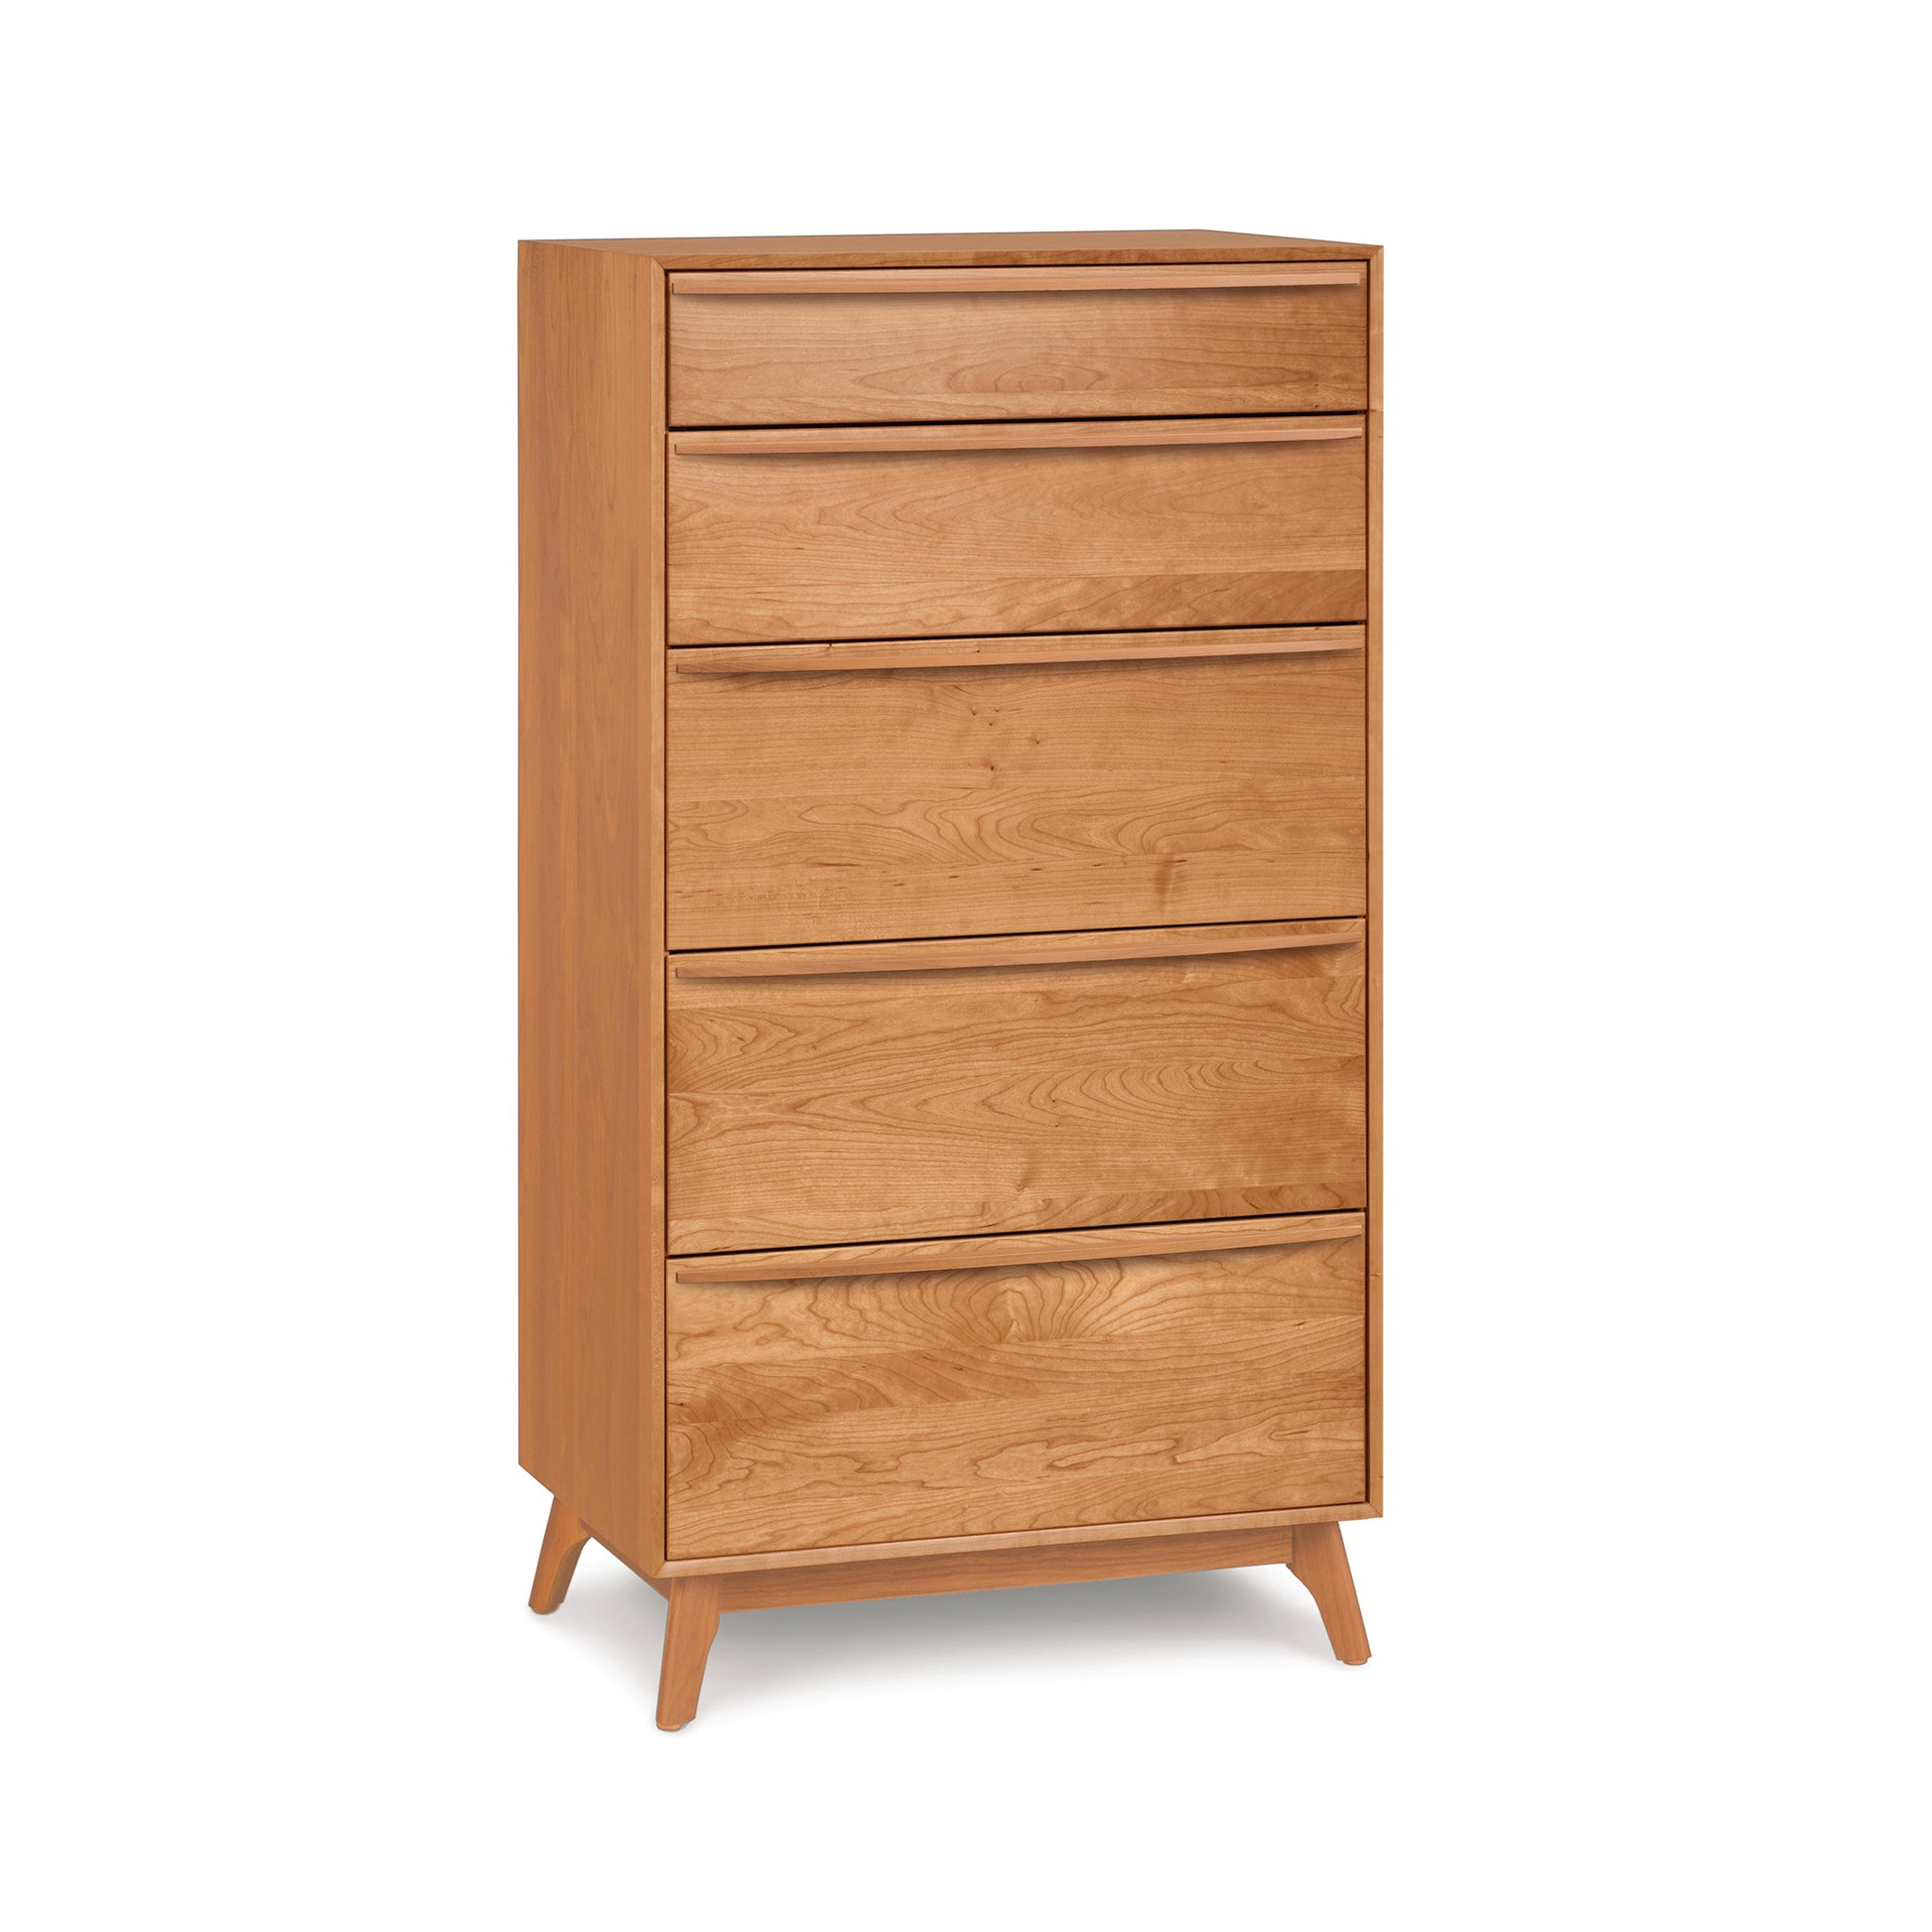 The Copeland Furniture Catalina 5-Drawer Chest showcases a solid wood construction, making it a durable and stylish addition to any bedroom. Placed on a crisp white background, this chest of drawers effortlessly